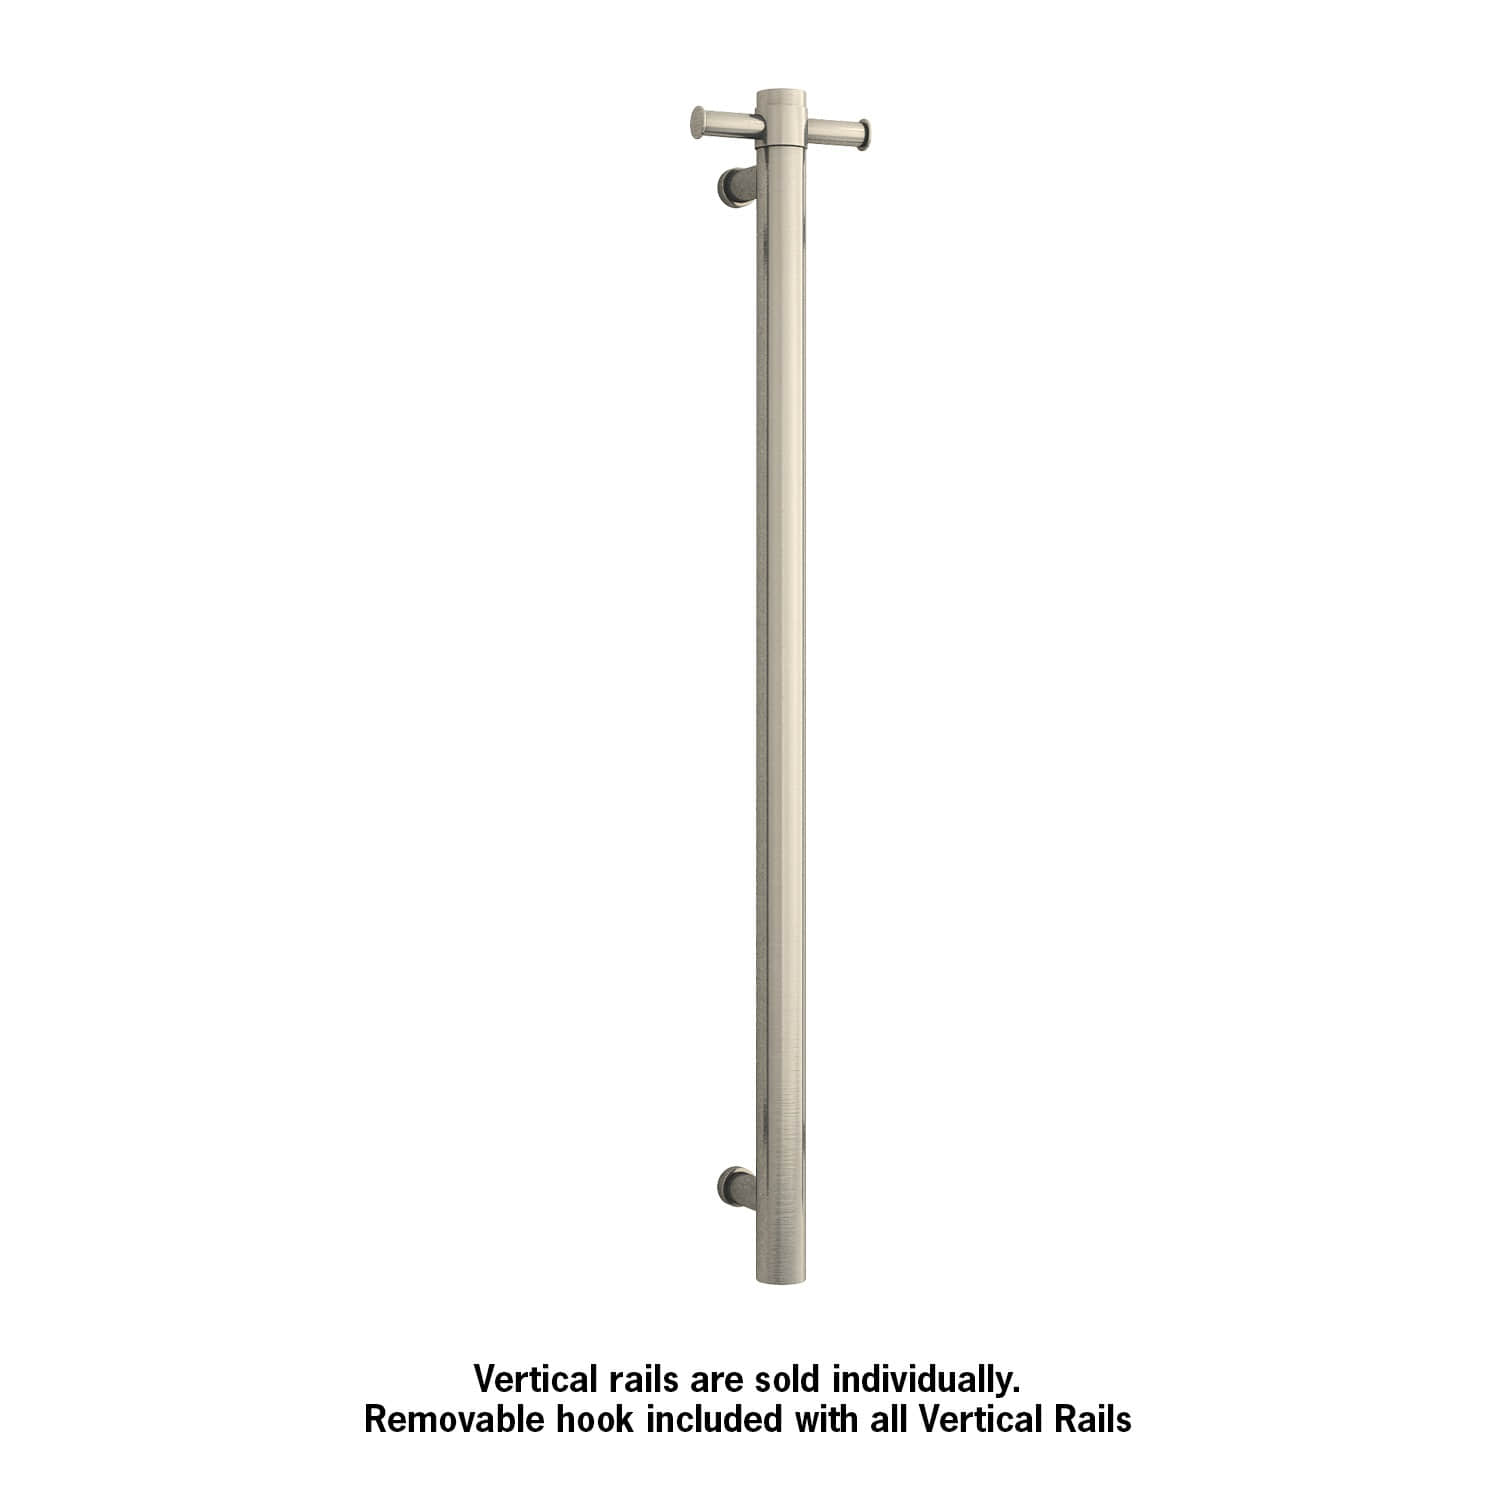 Brushed nickel Single heated towel rail from Infinity Plus bathrooms deliver AU wide